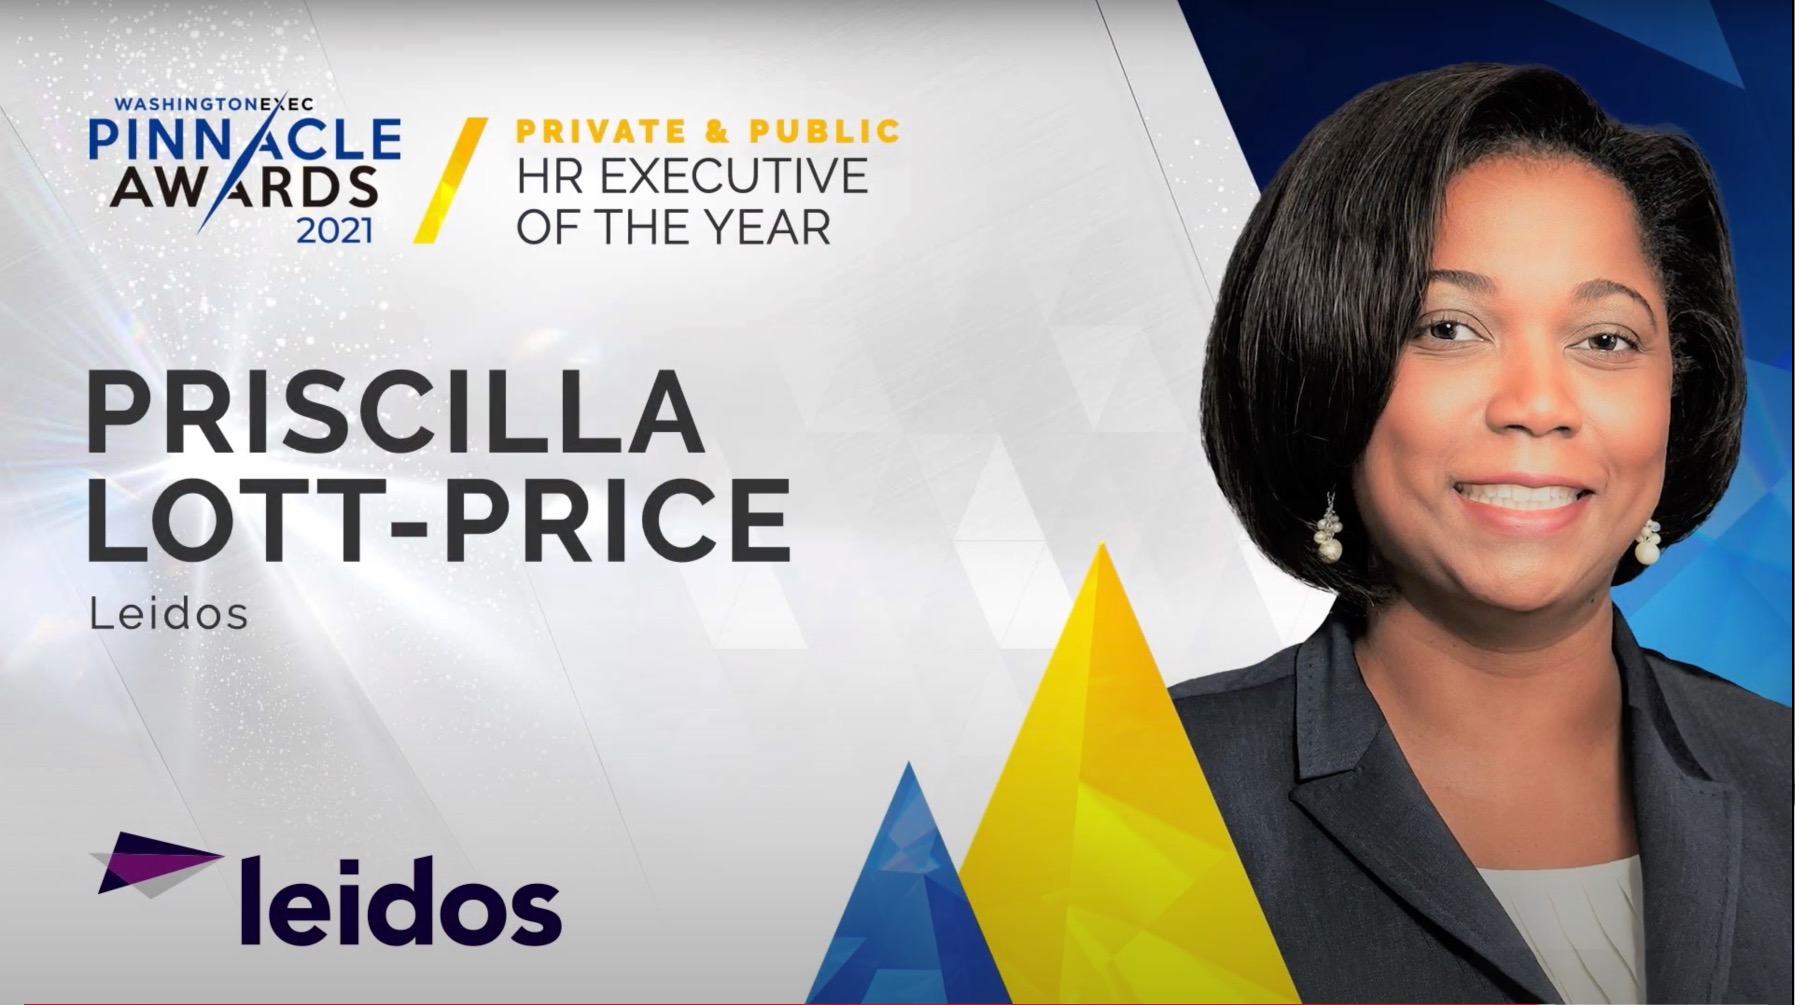 HR - Congratulations to Priscilla Lott-Price from Leidos on winning the award for Human Resources Executive of the Year (HR) in the Private & Public Sectors